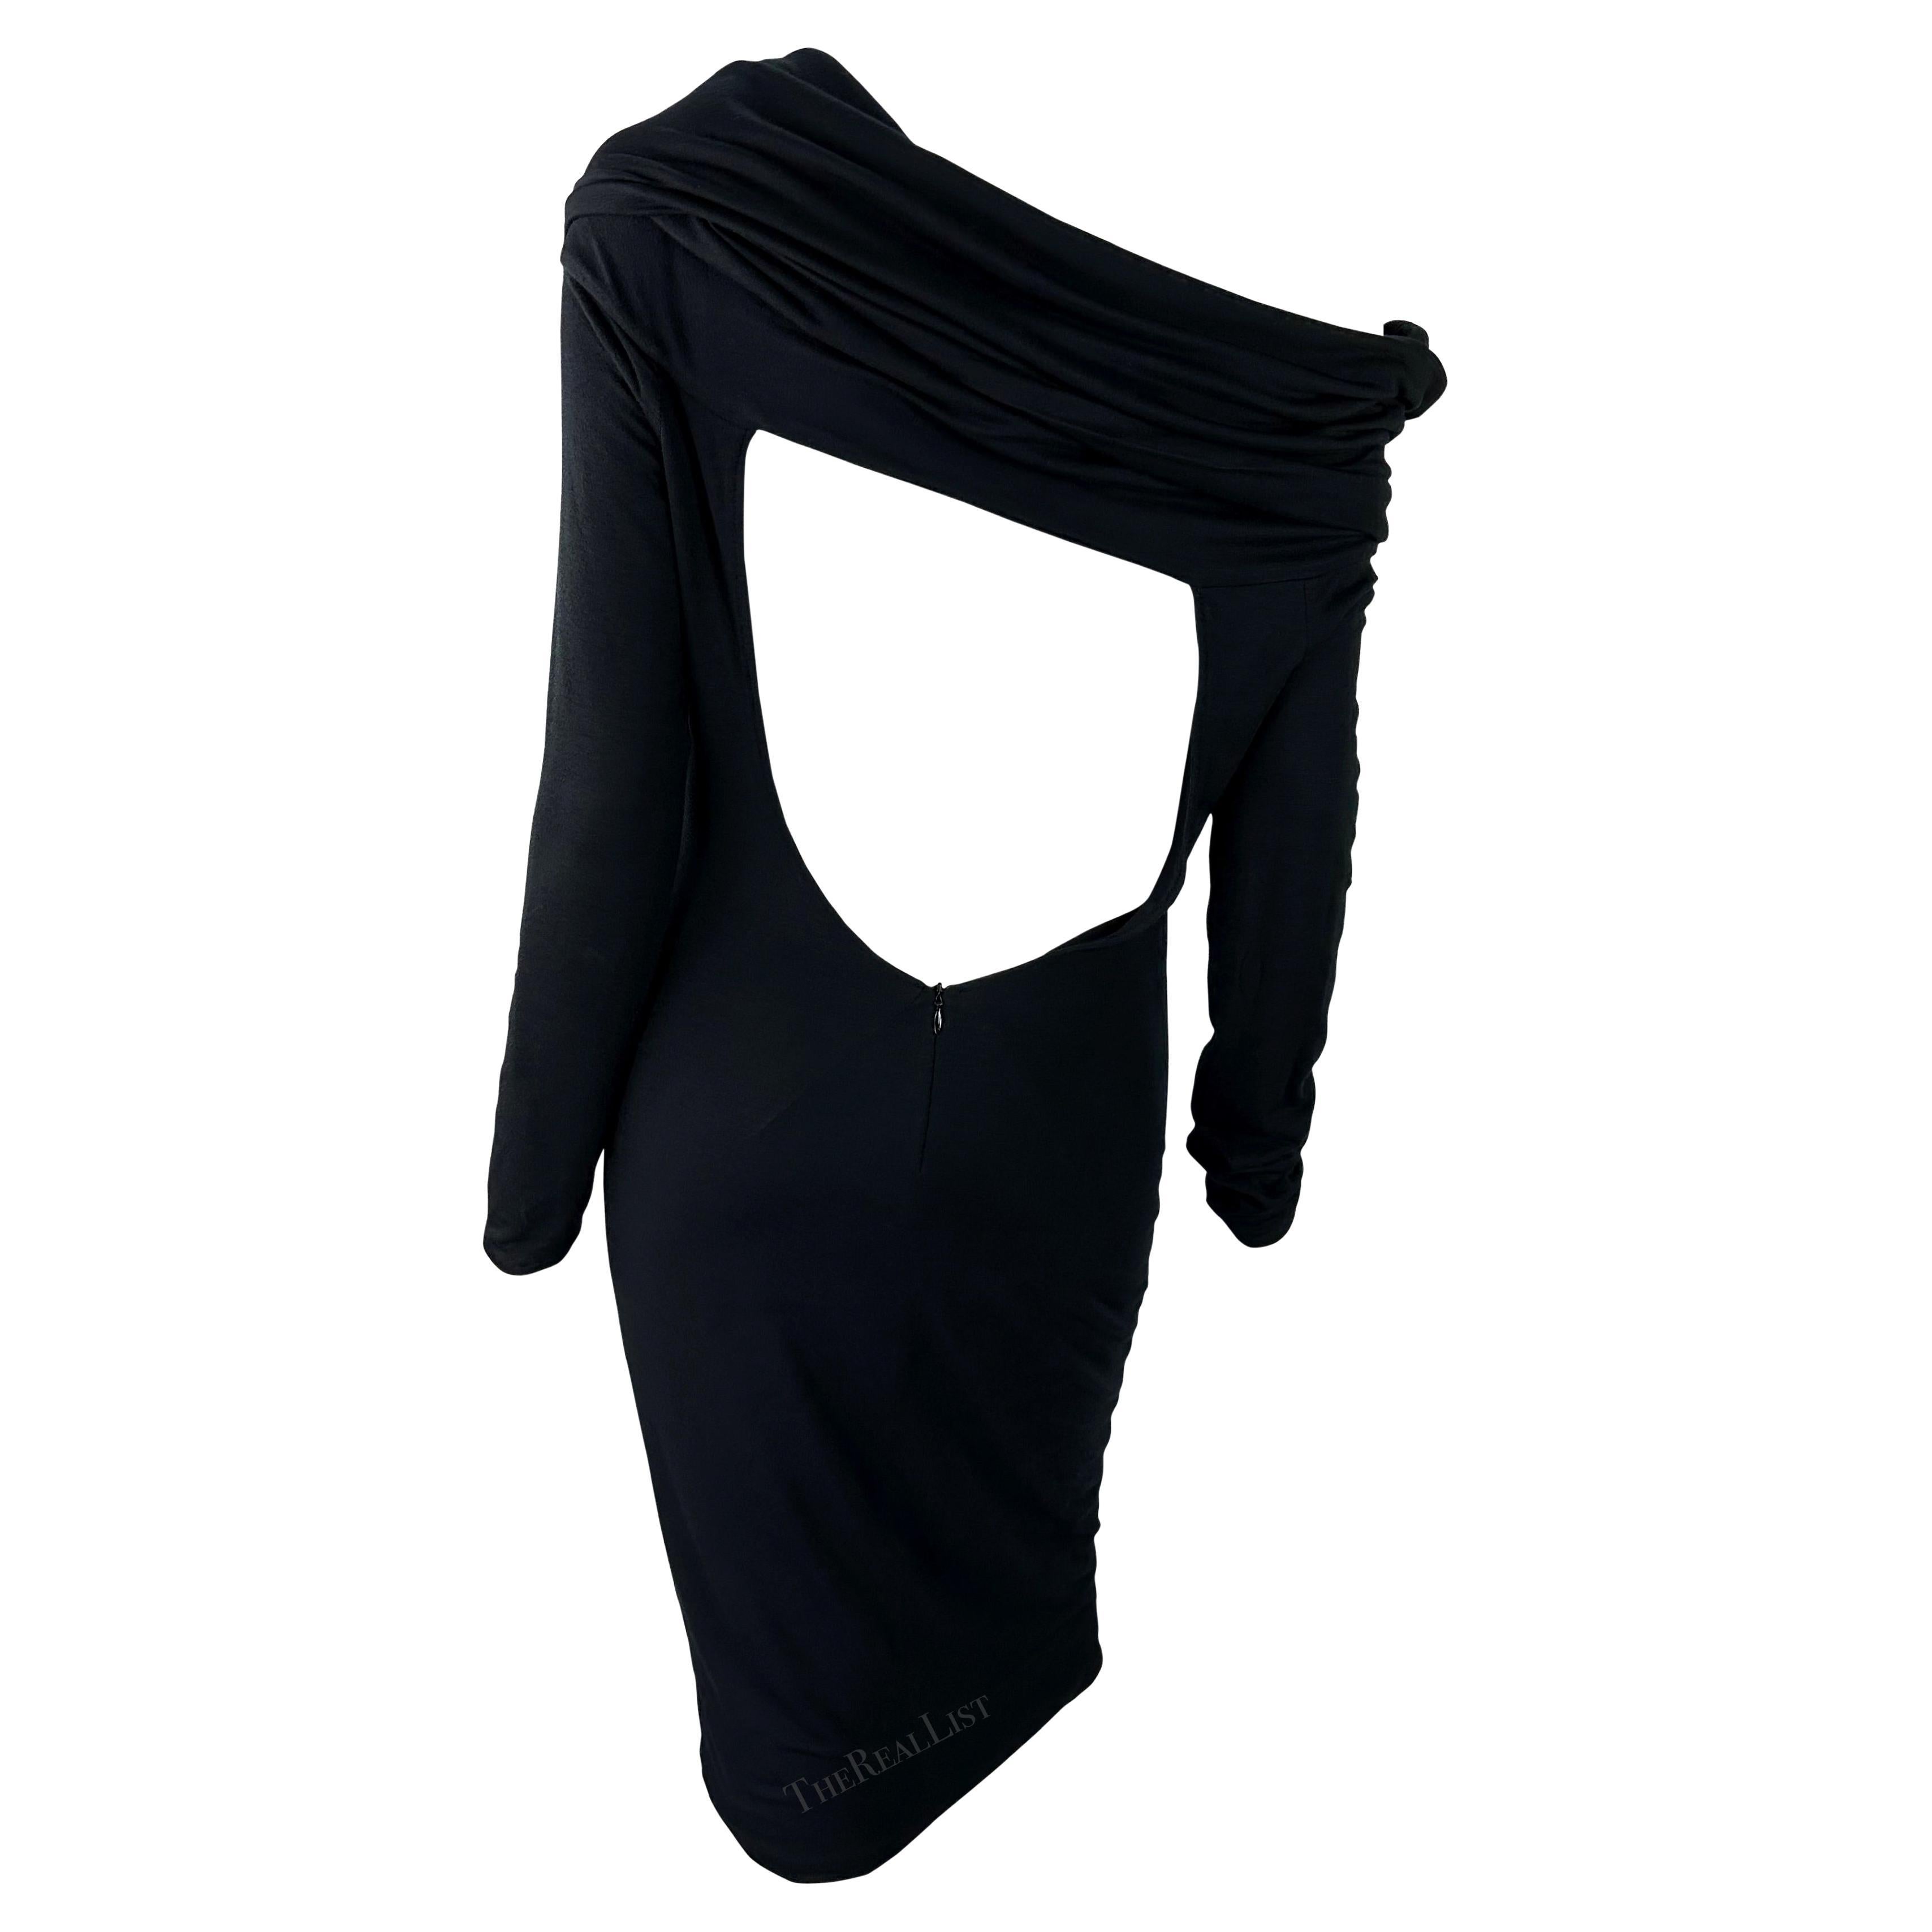 F/W 2005 Versace by Dontella Runway Black Backless Cowl Bodycon Stretch Dress For Sale 6